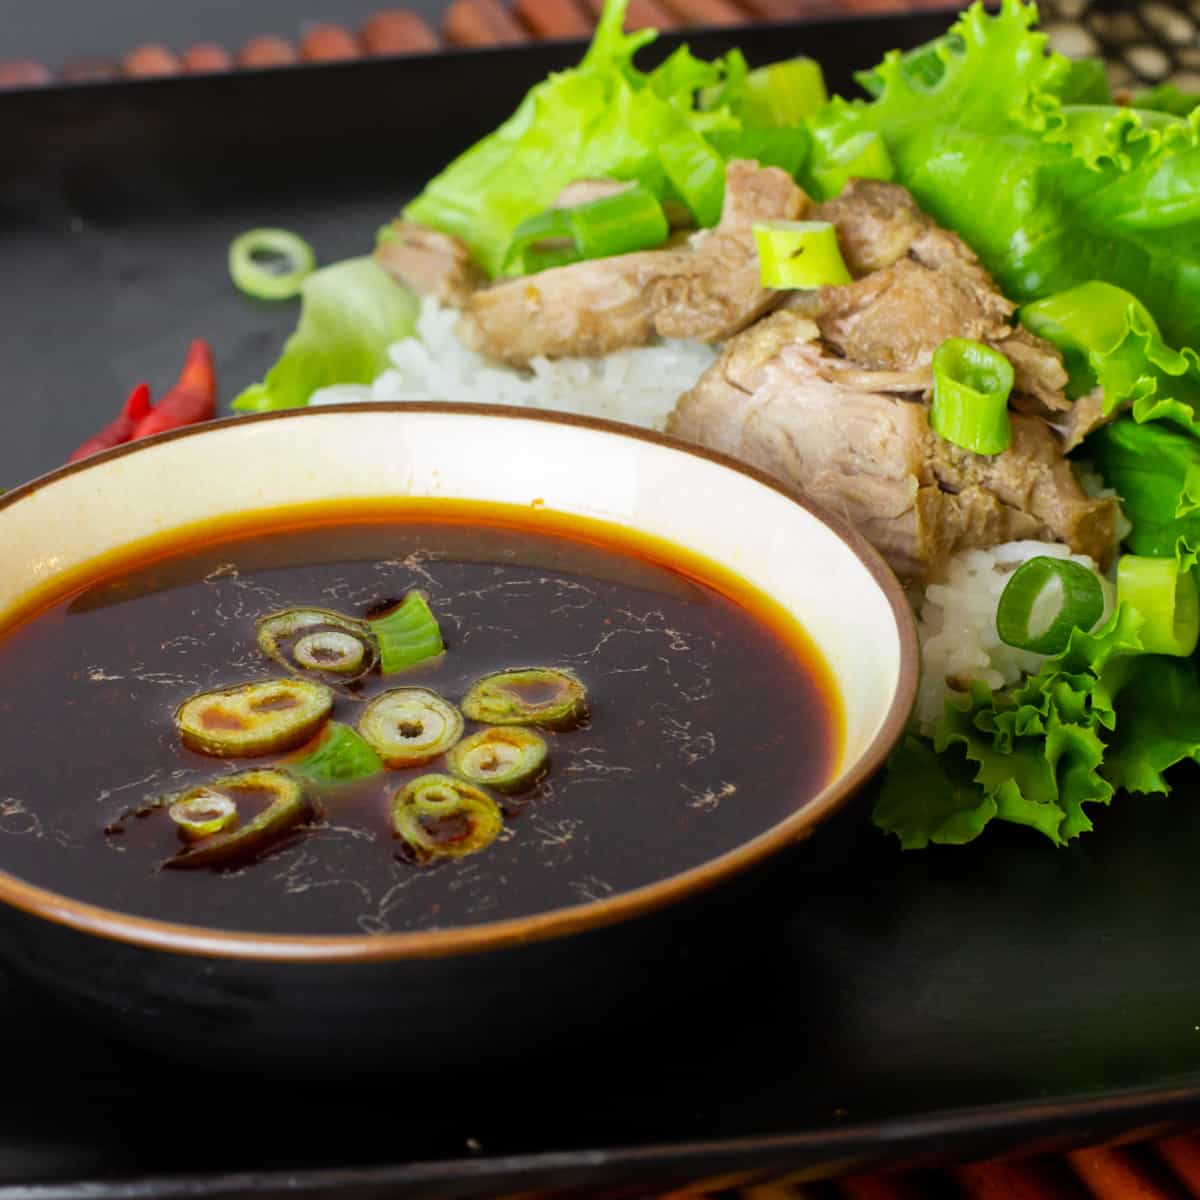 A plate with lettuce wraps and a bowl of sauce.